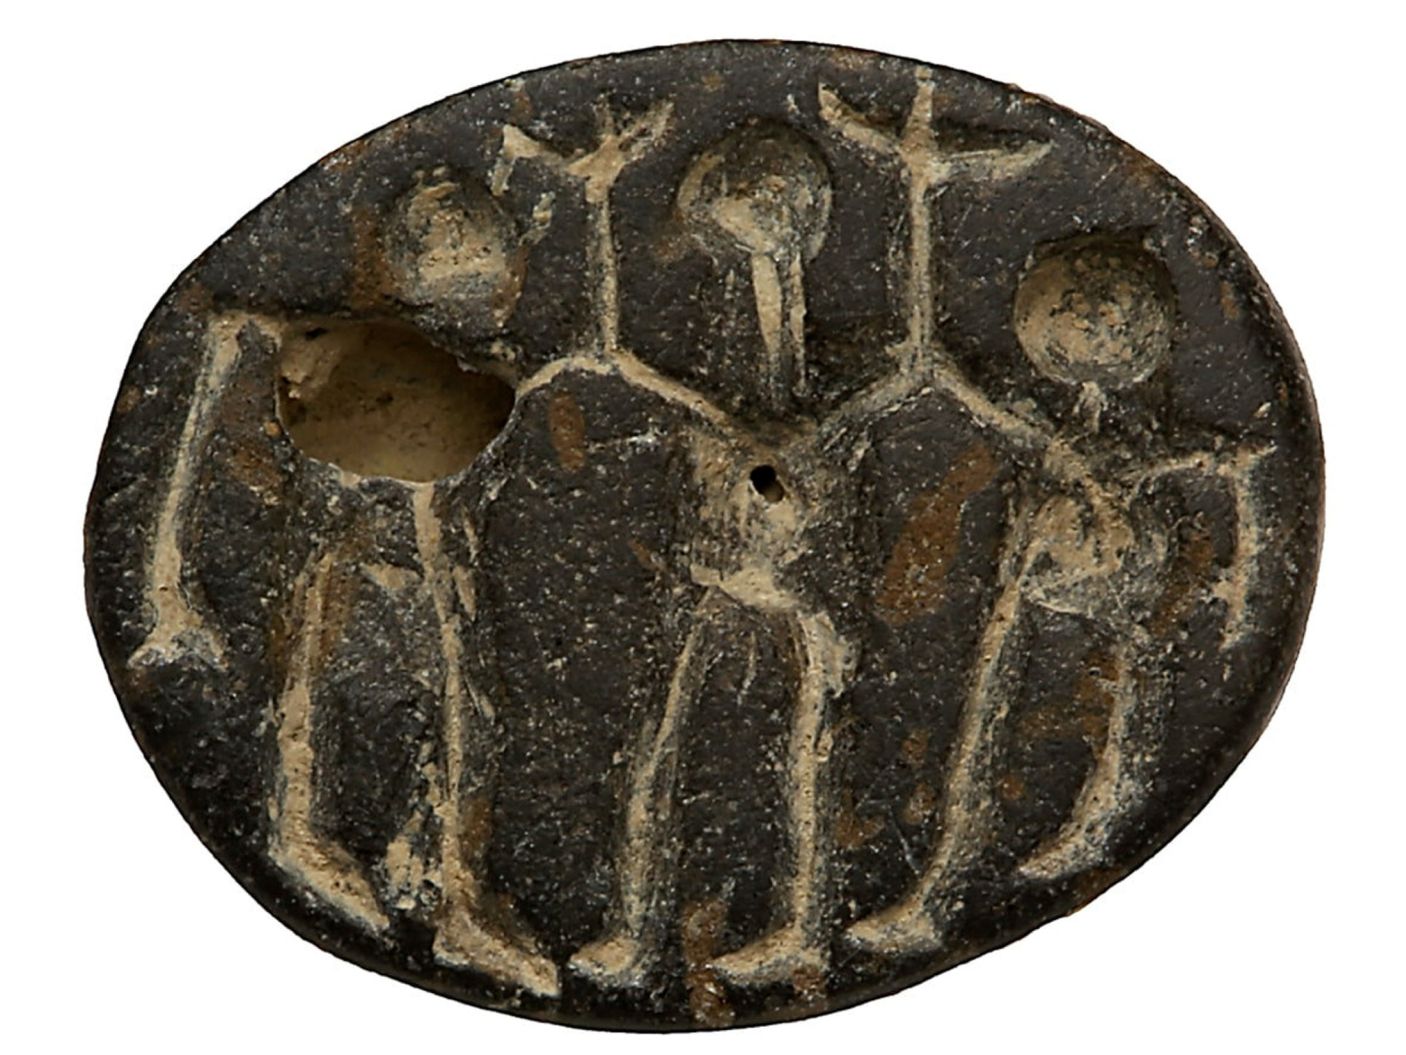 small_stone_seal_found_in_abel_beth_maacah_depicting_a_dance_scene_10th-9th_centuries_bce.jpg